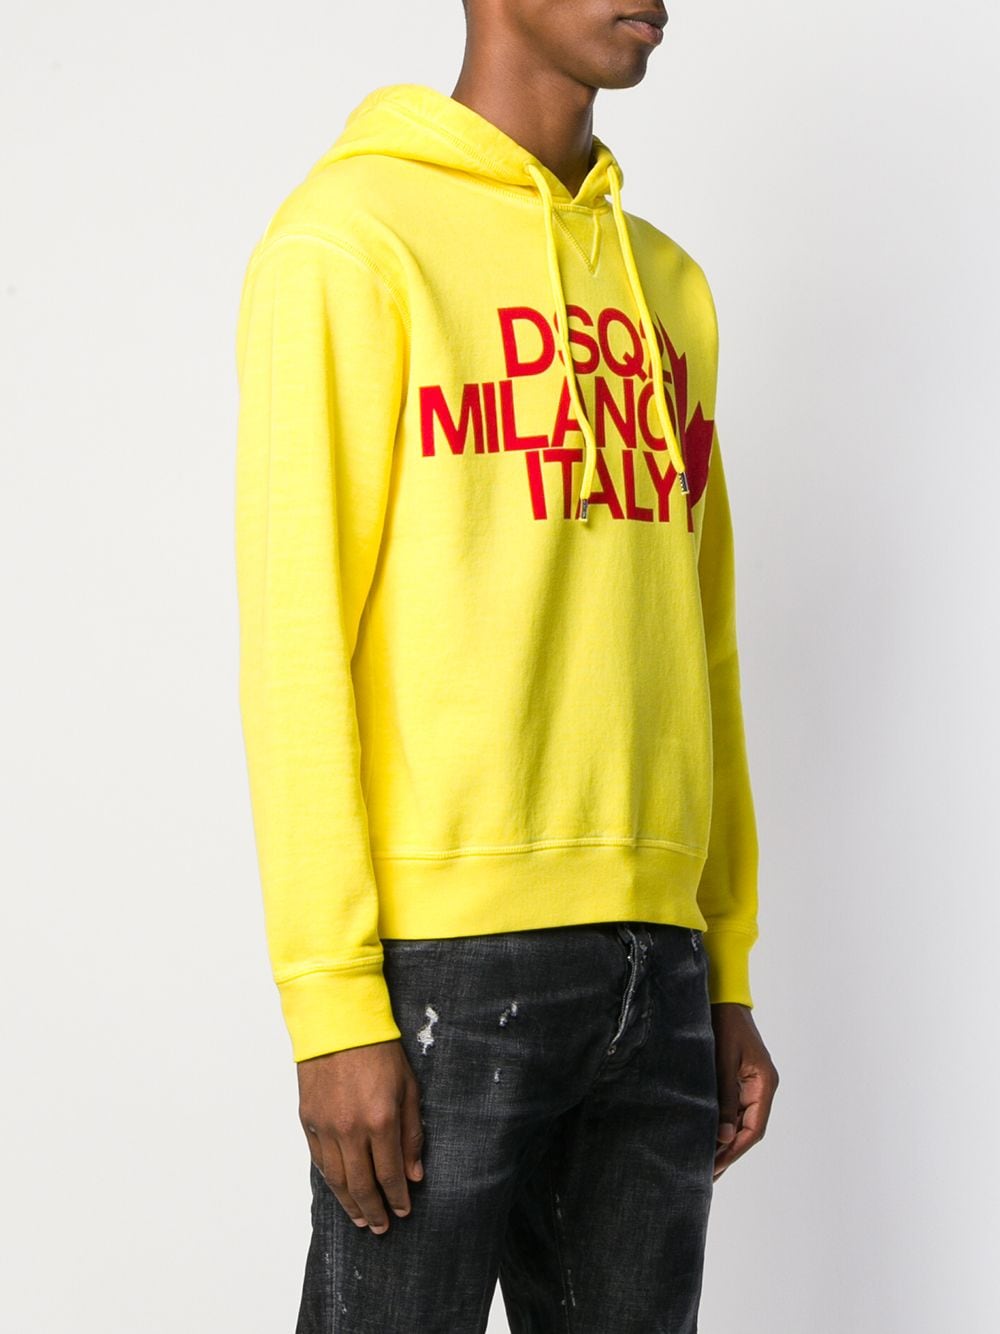 Dsquared2 Milano Italy Hoodie - Farfetch